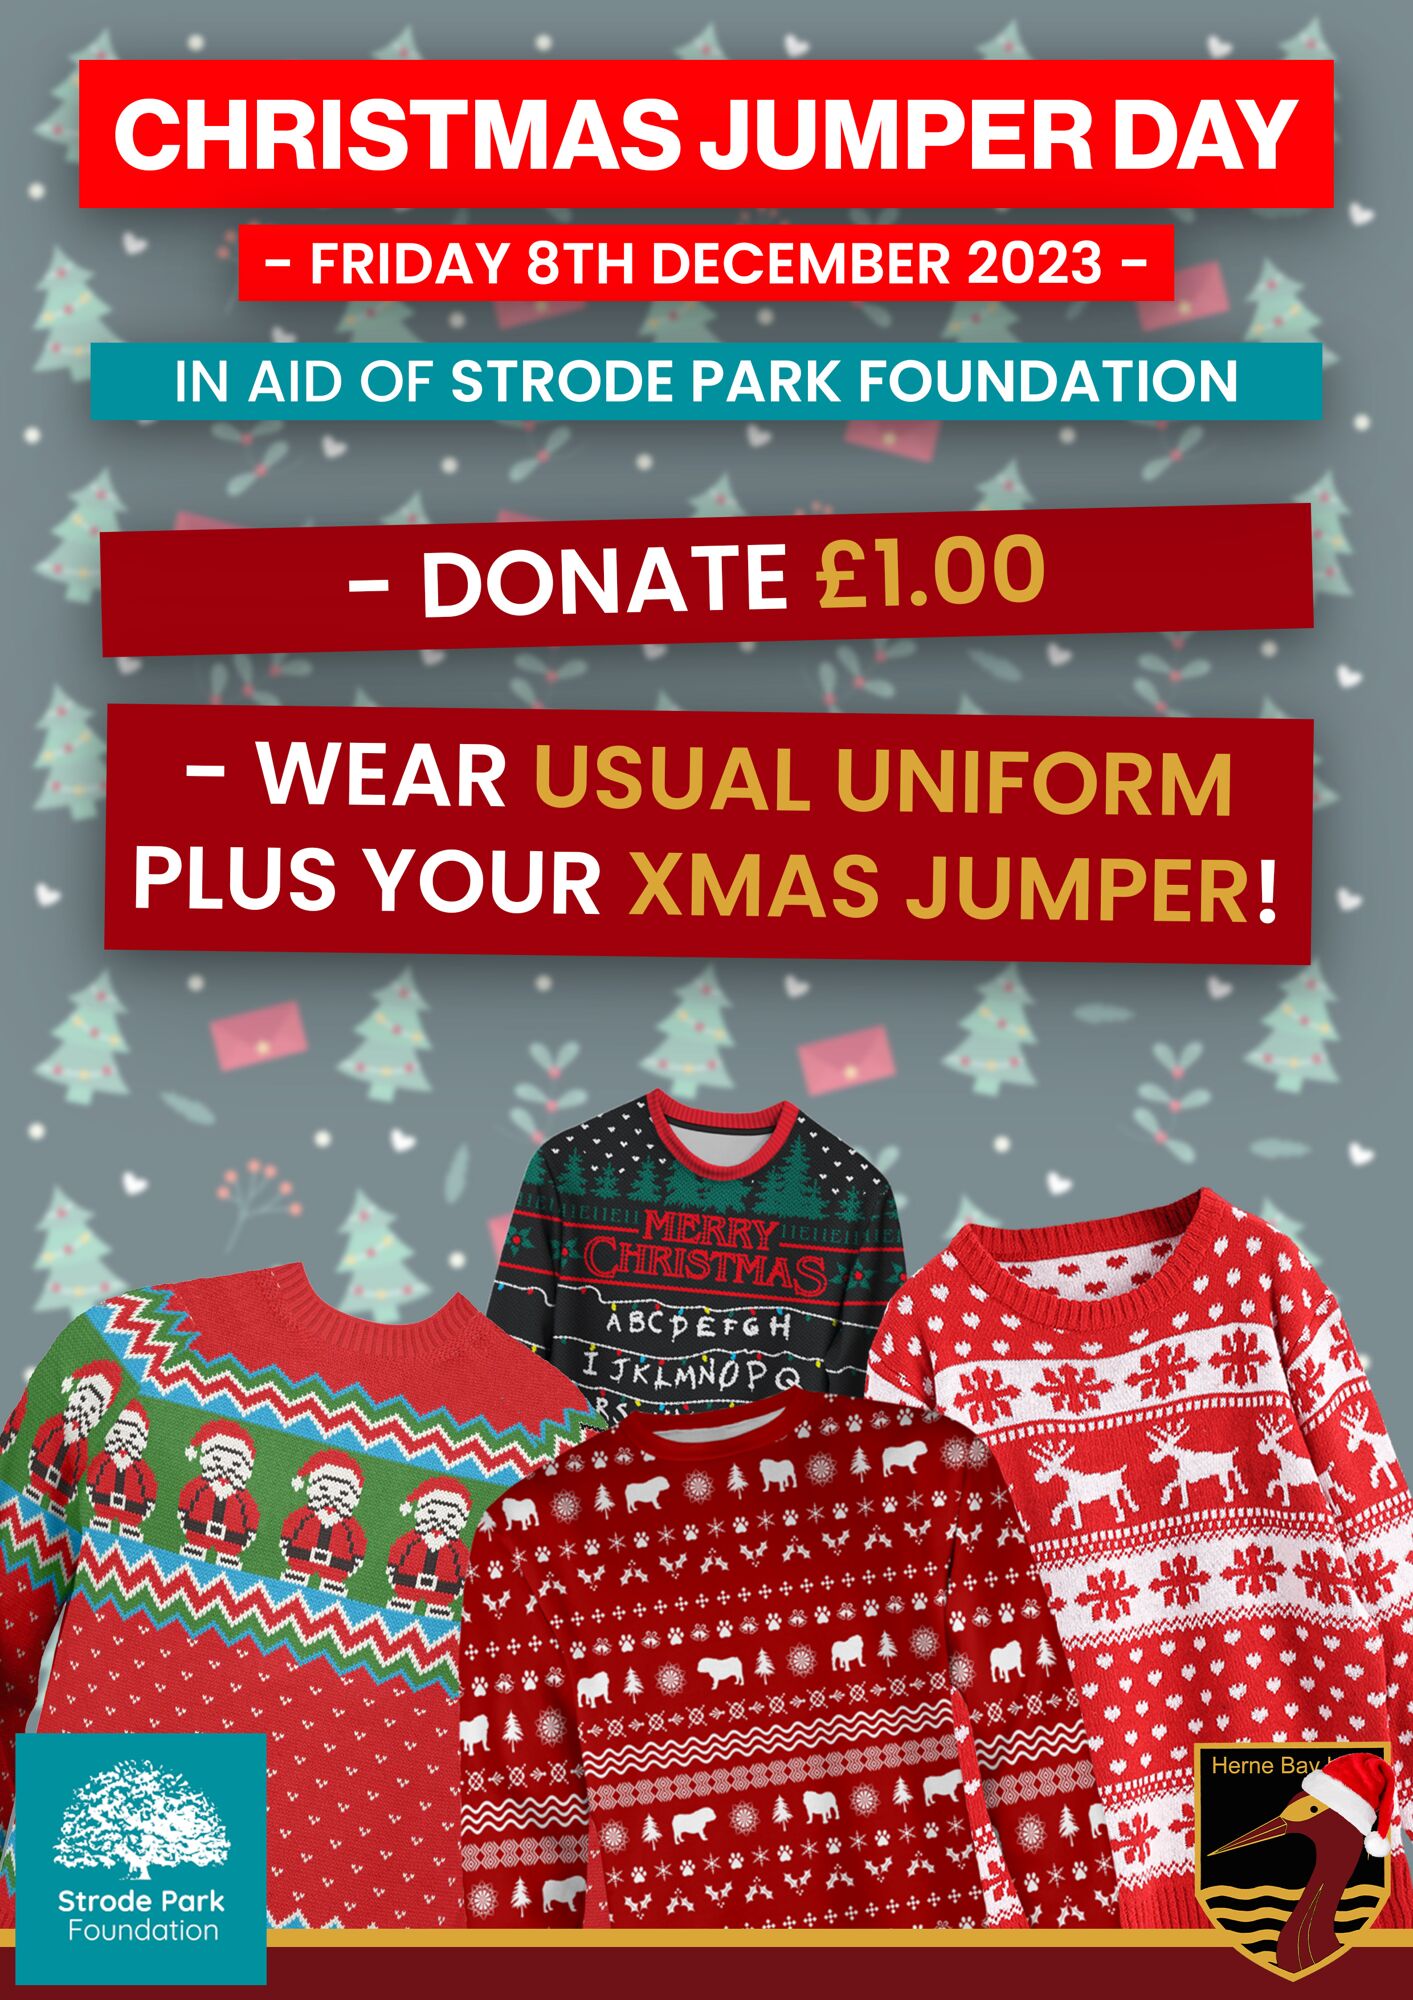 Christmas jumper day 2023 poster